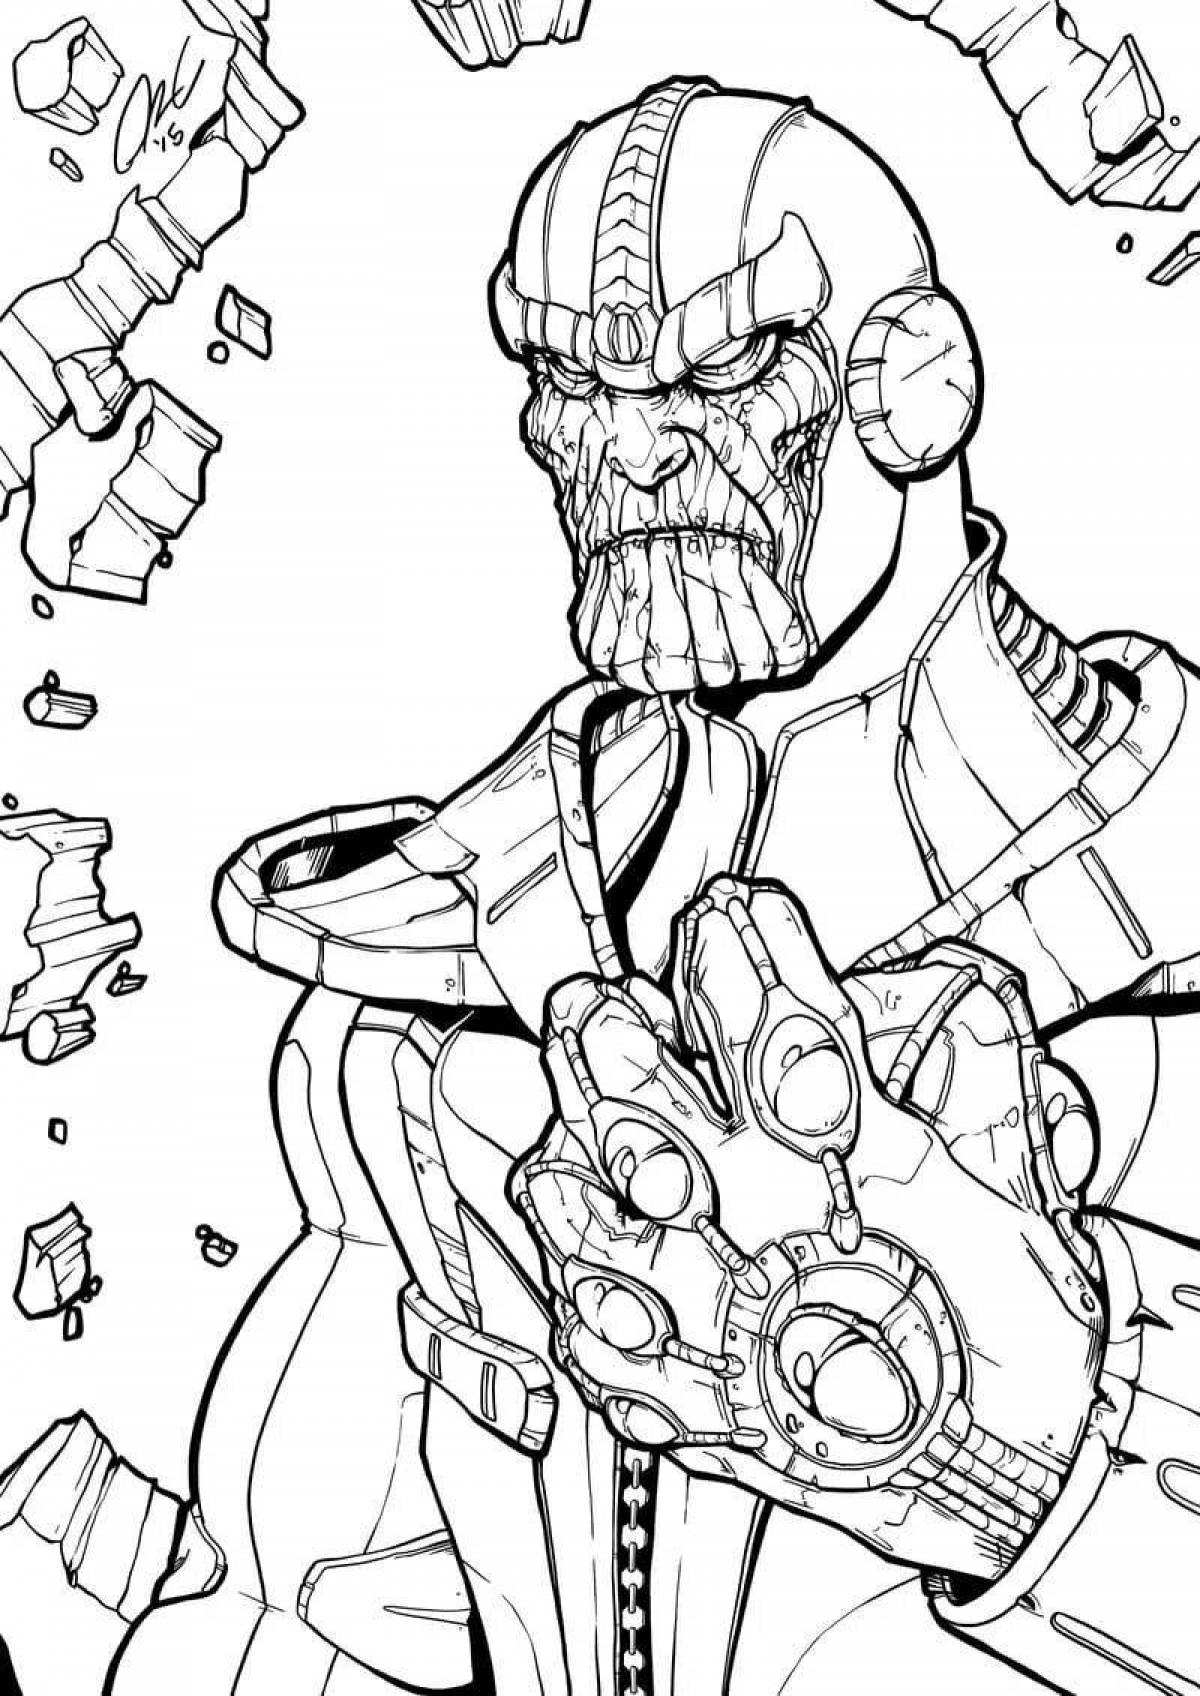 Creative thanos coloring for kids